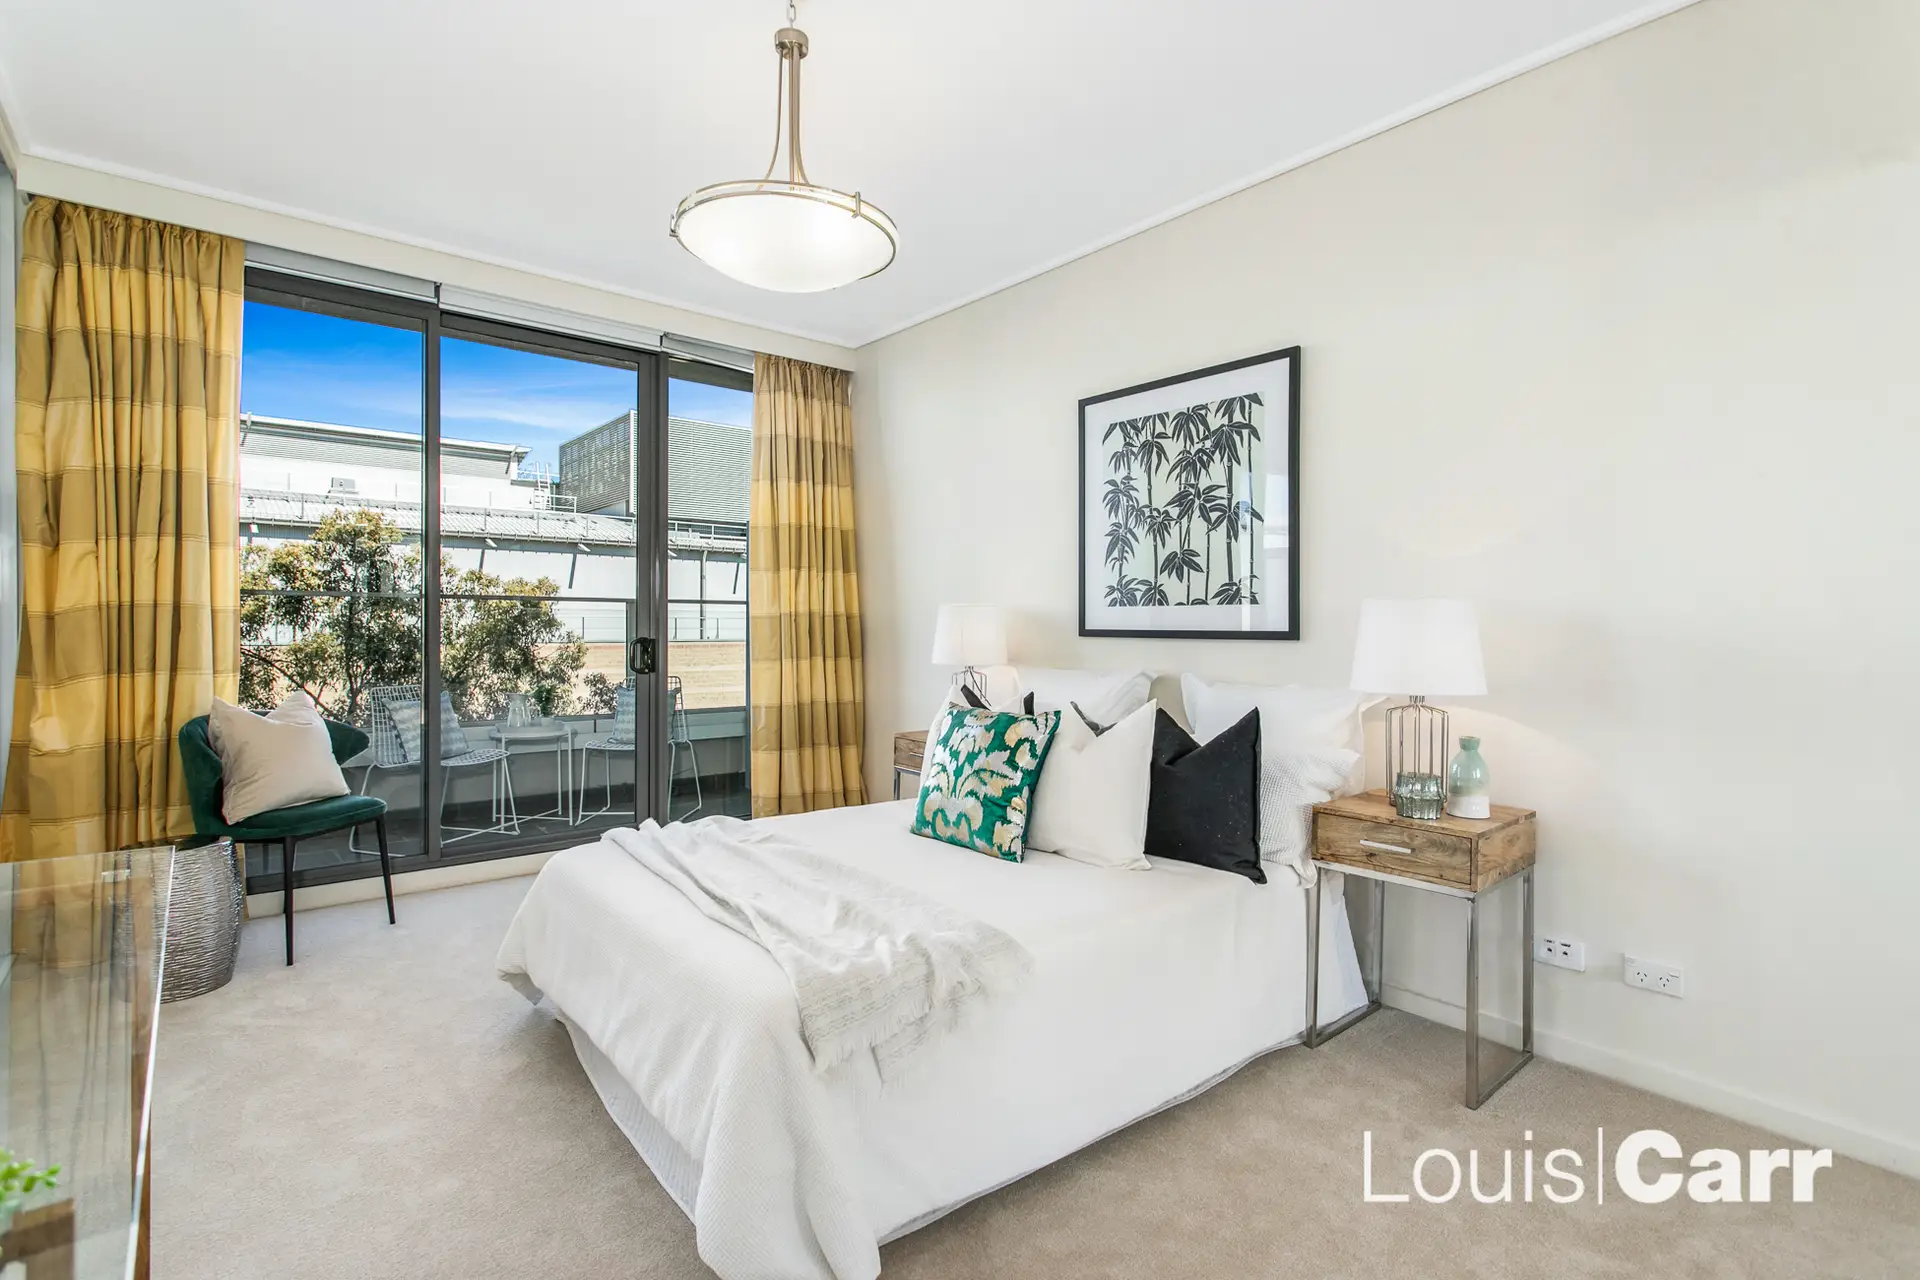 Photo #7: 707/12 Pennant Street, Castle Hill - Sold by Louis Carr Real Estate